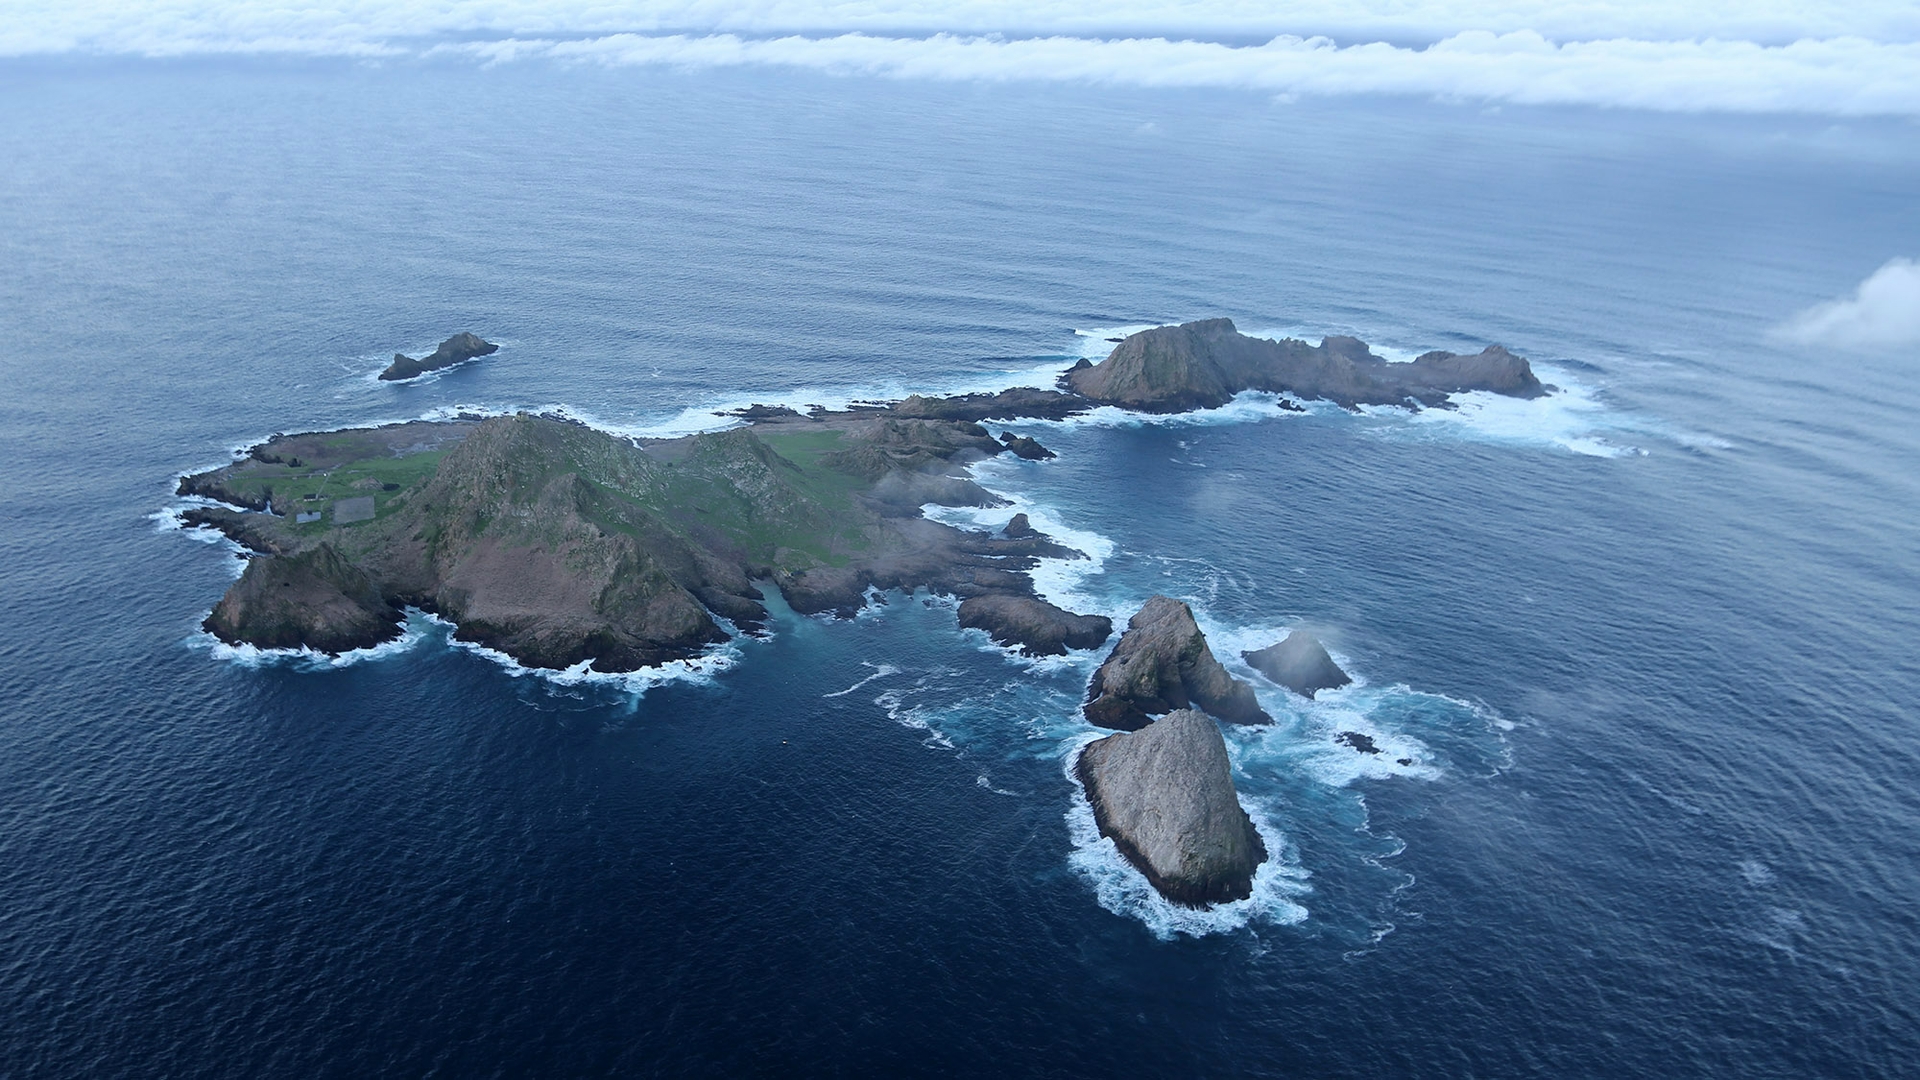 aerial view of rocky, treeless island withpatches of green and fog bank in background